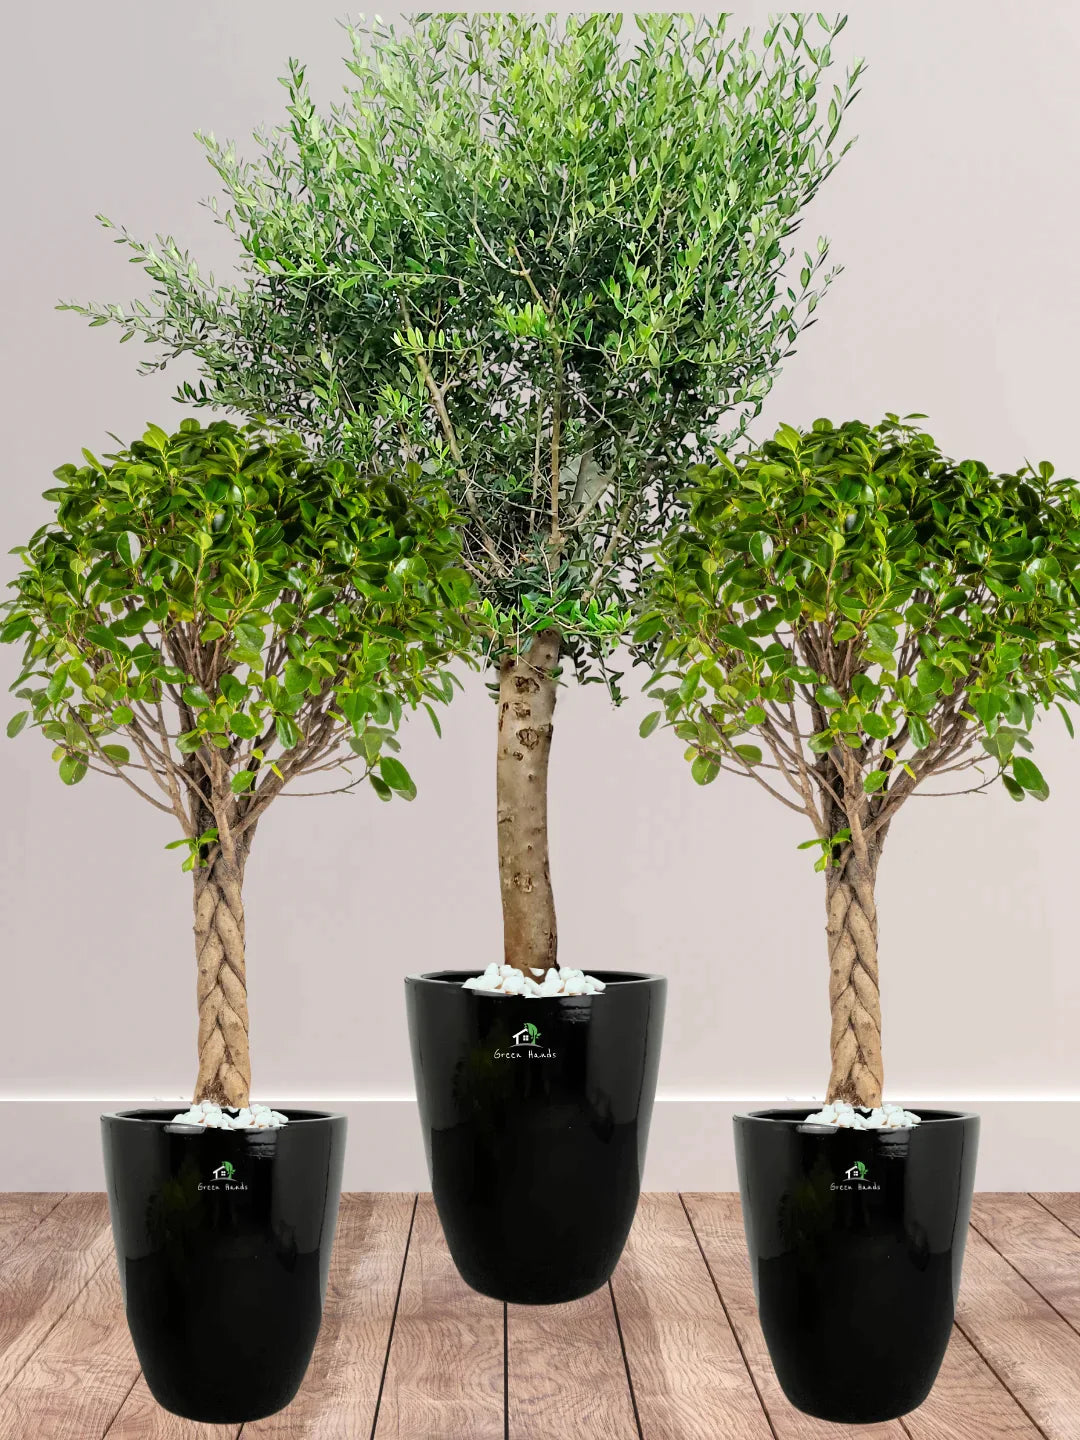 Potted-XL-Mature-Olive-Tree-two-Twisted-Bonsais-in-Regular-Ceramic-Black-Pot